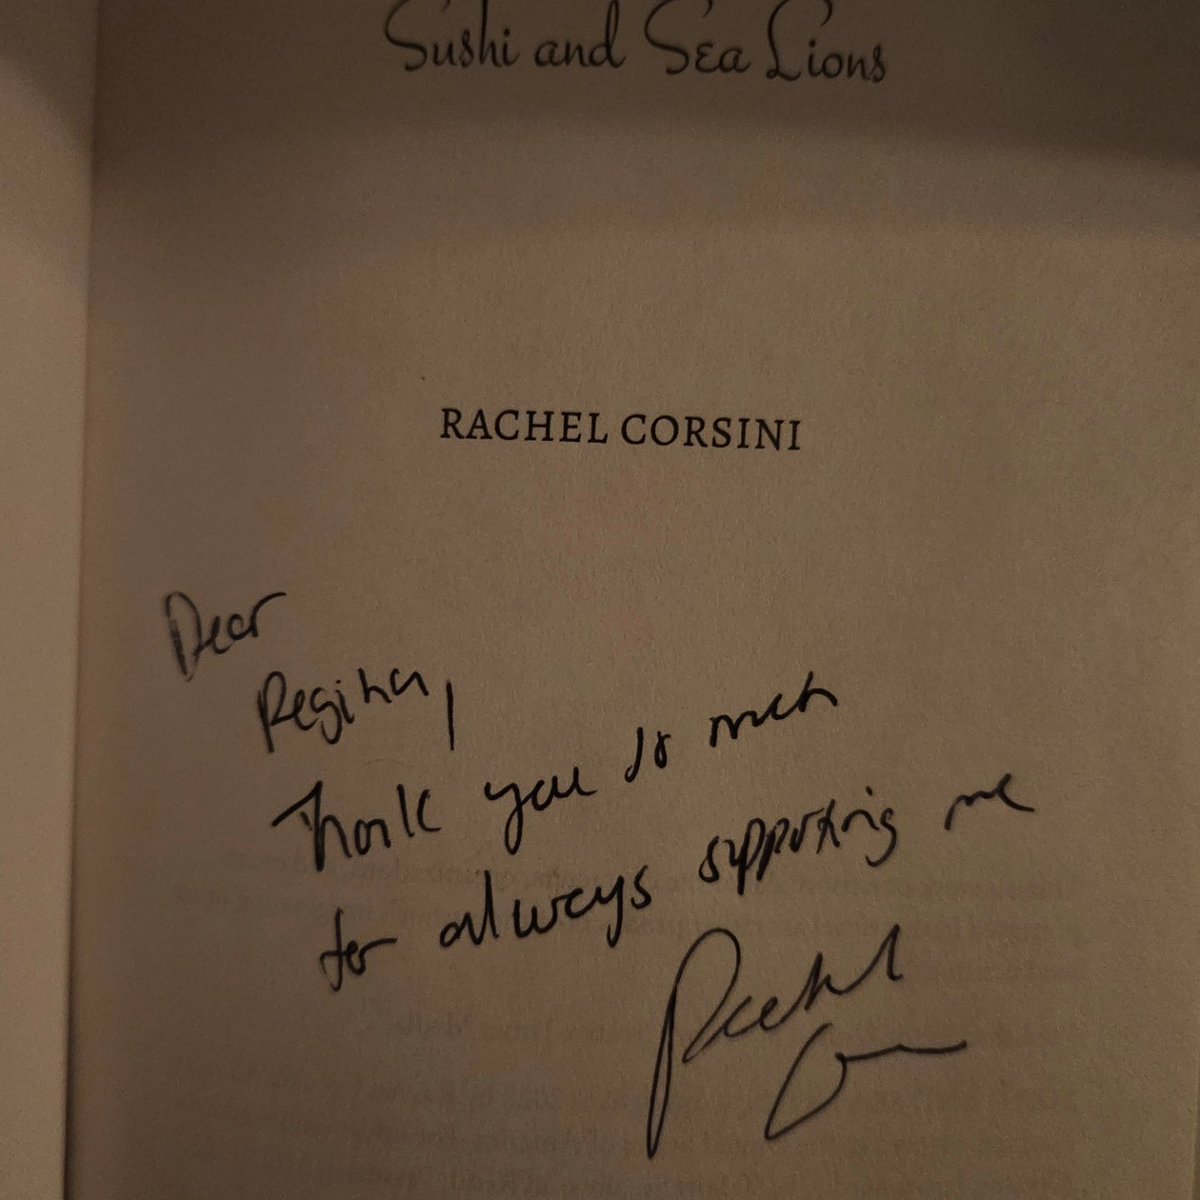 I finally got my copy of Sushi and Sea Lions by Rachel Corsini @madameraerae at @tinyraccoonbooks in Sayville. I loved this book so much, and now I have a signed copy on my shelf along with some awesome book swag!! Thank you, Rachel and Tiny Raccoon Books!